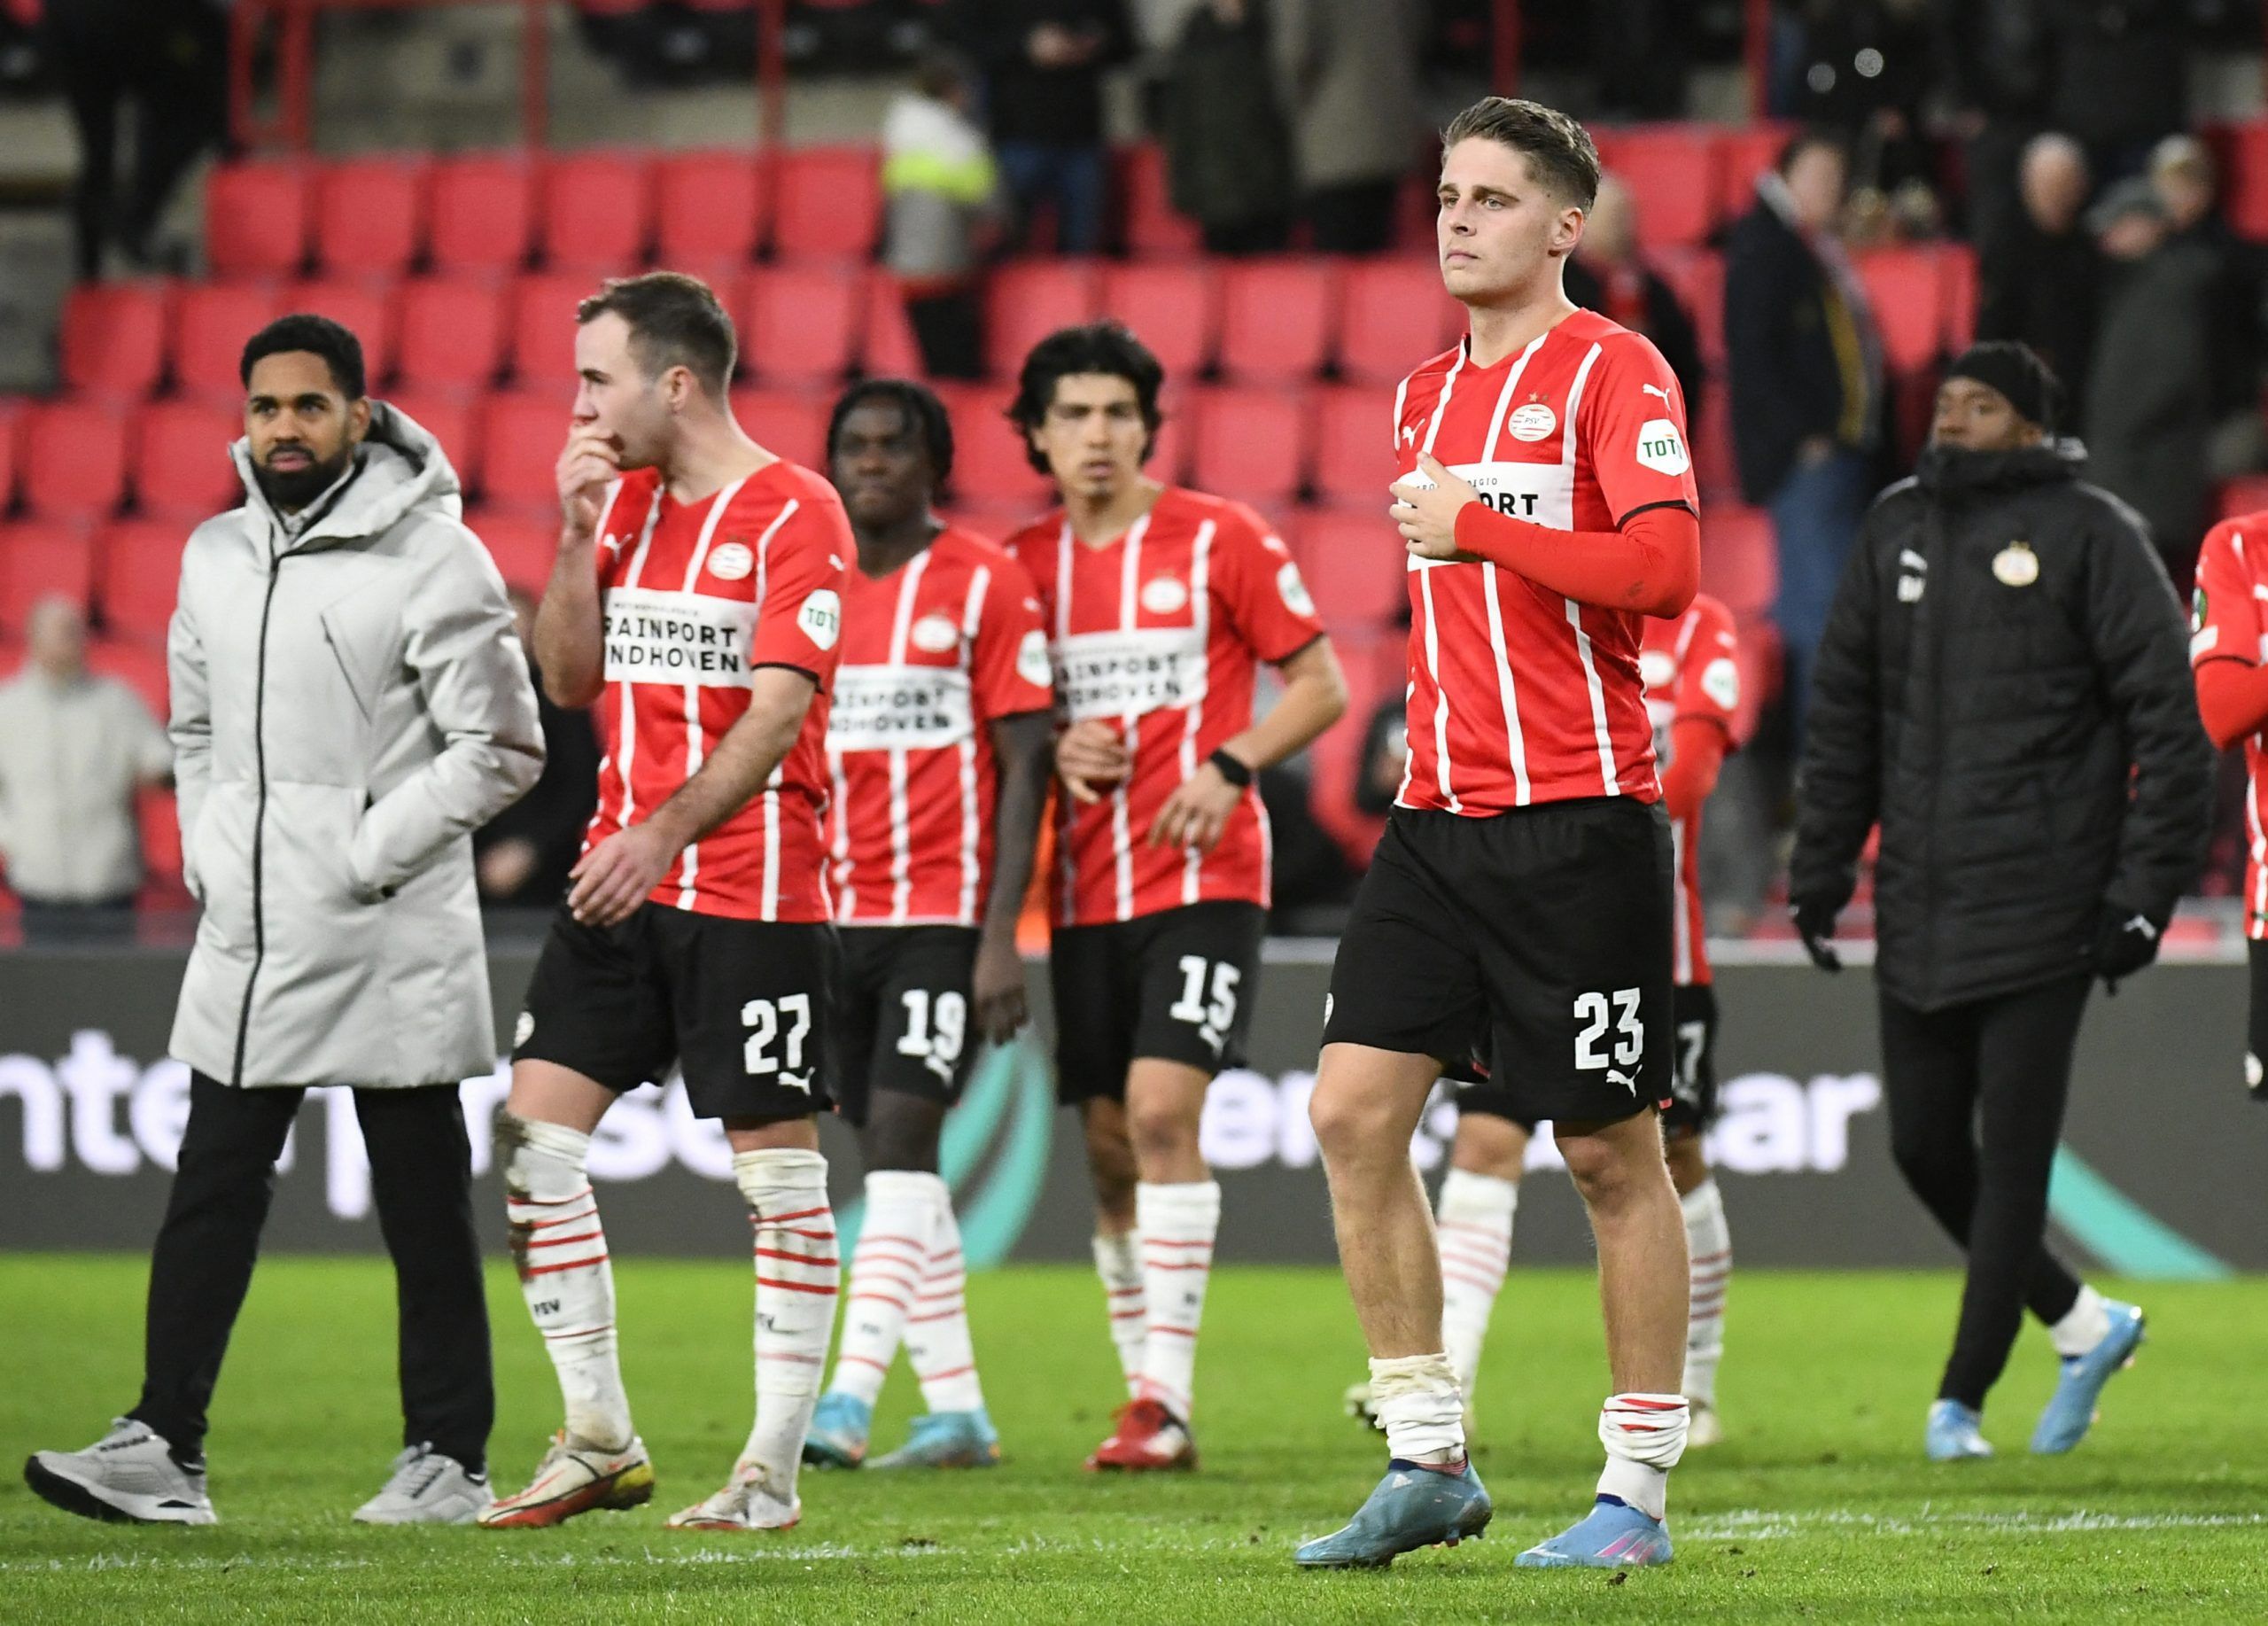 Soccer Football - Europa Conference League - Play Off First Leg - PSV Eindhoven v Maccabi Tel-Aviv - Philips Stadion, Eindhoven, Netherlands - February 17, 2022 PSV Eindhoven's Joey Veerman and teammates after the match REUTERS/Piroschka Van De Wouw